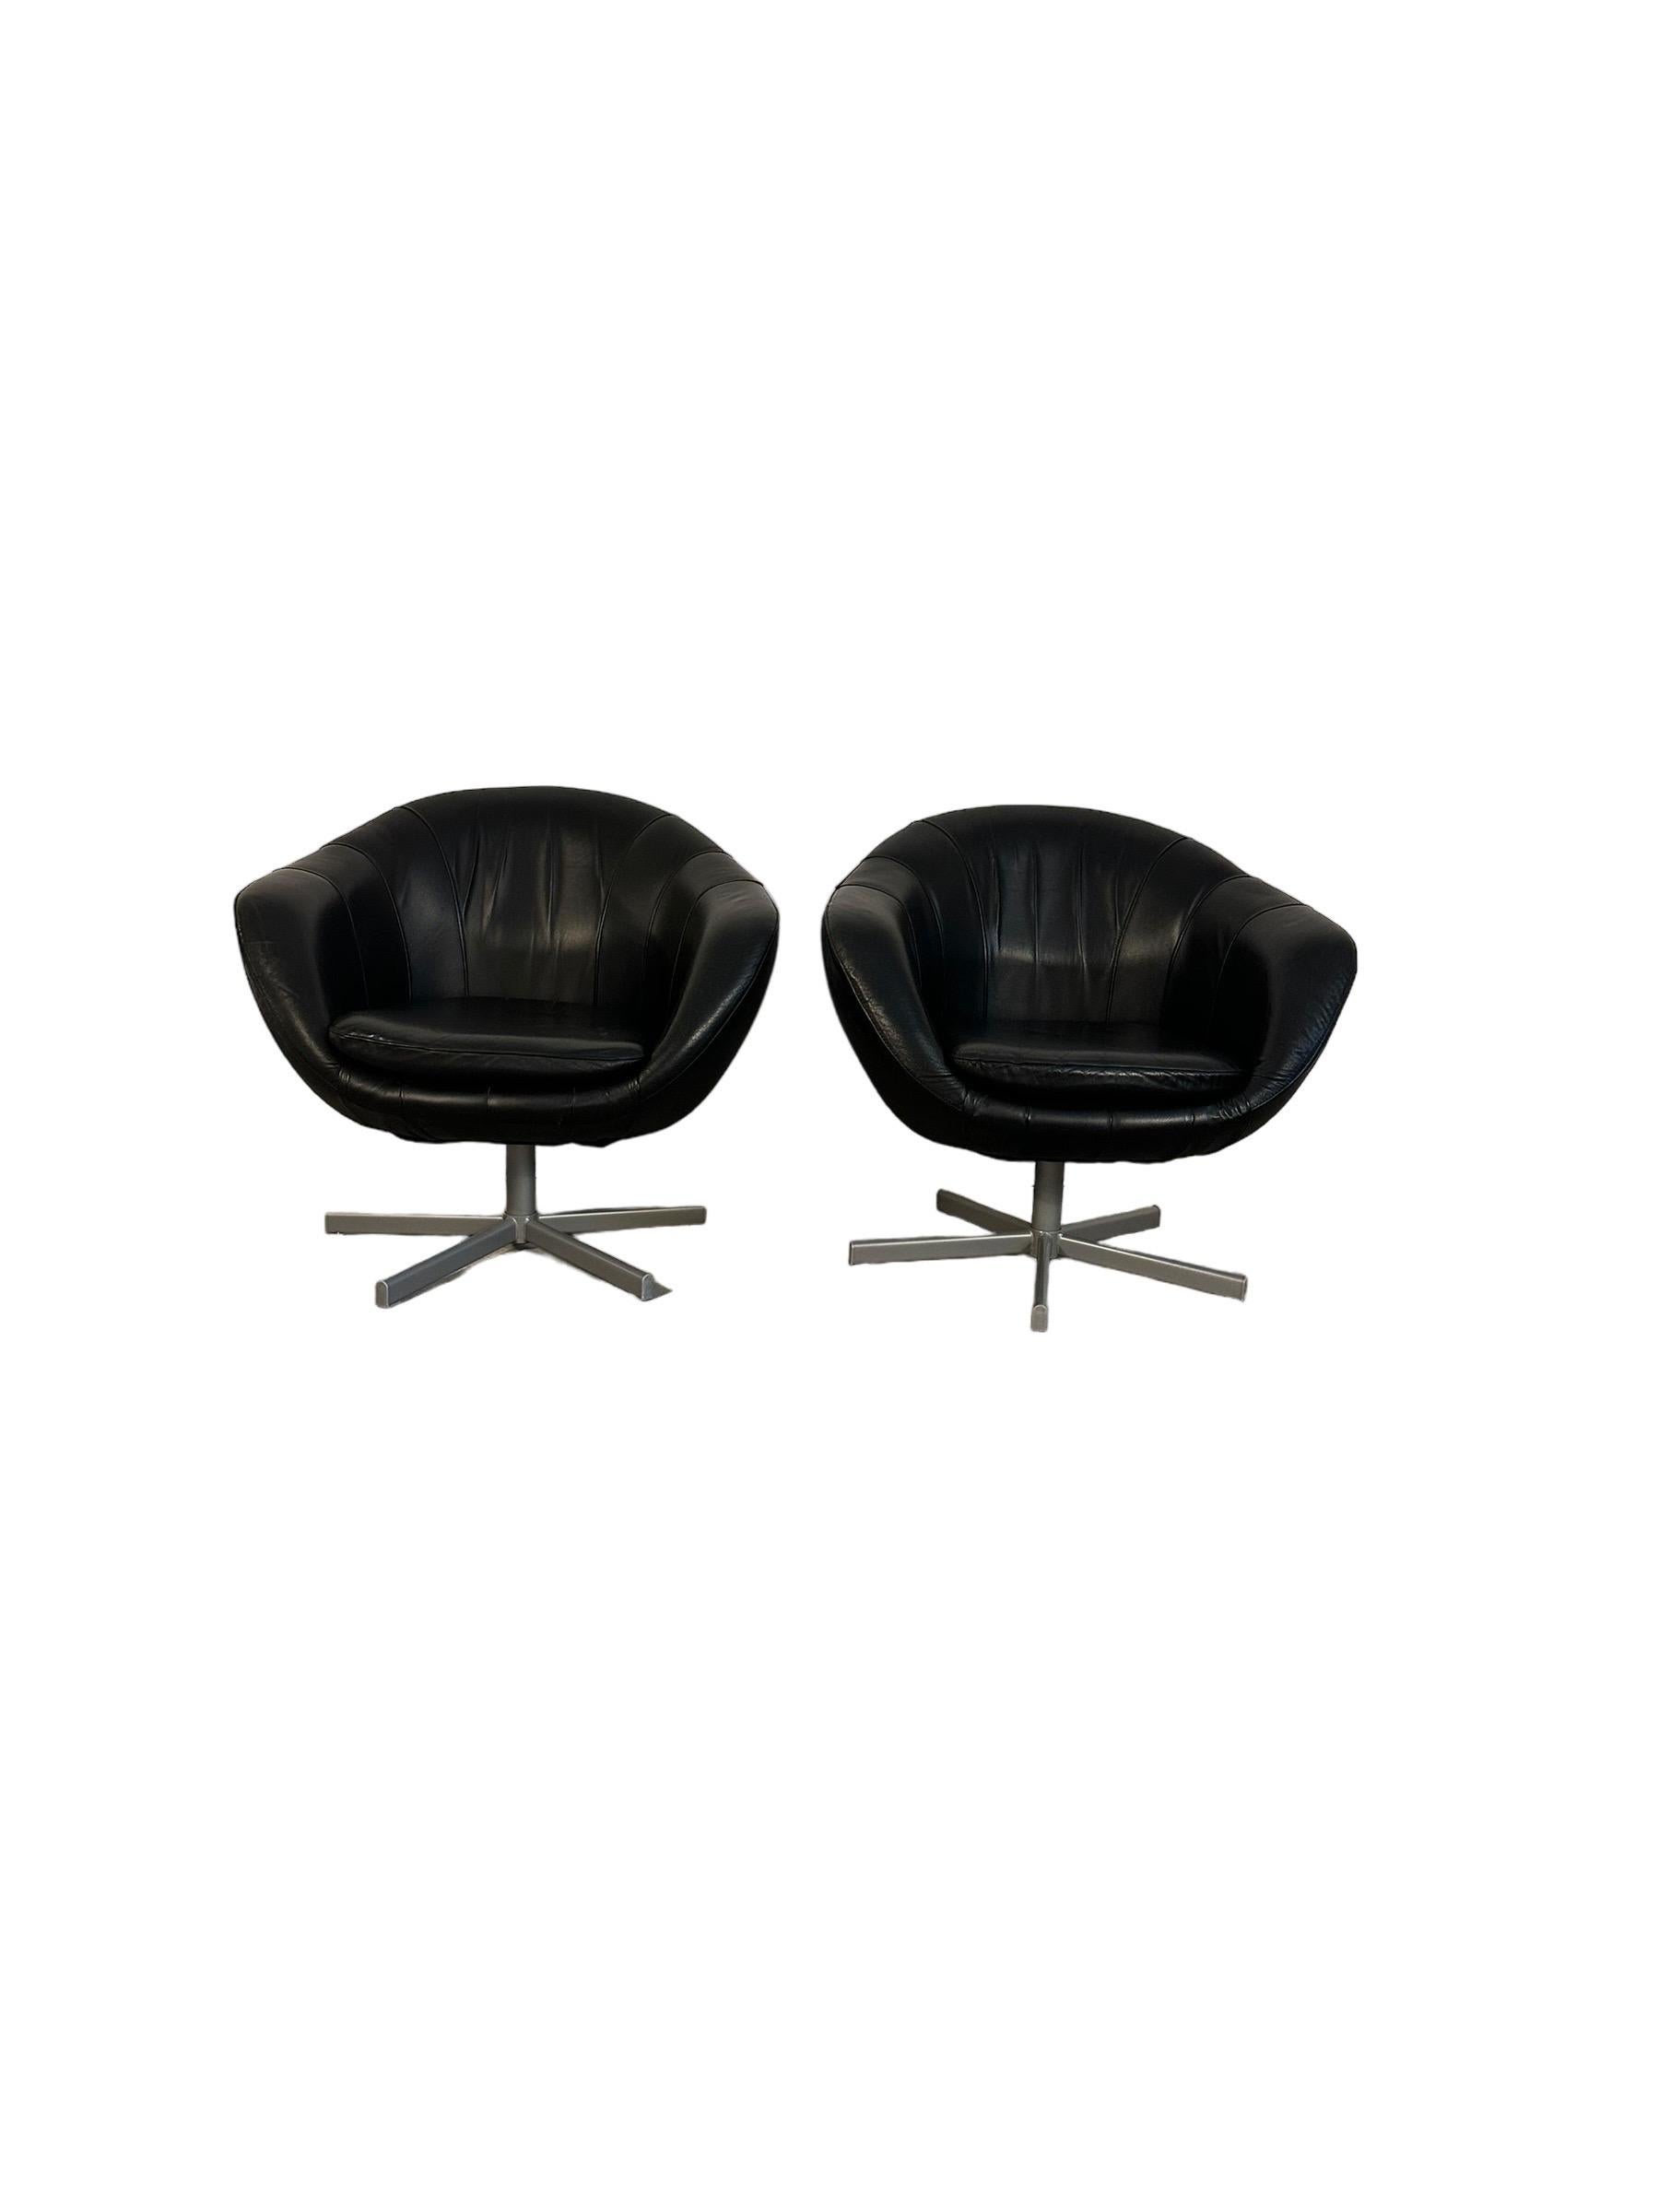 Meet our mid-century modern pod chairs: timeless black leather, a fun swivel feature, and in great shape. They're ready to add a dash of classic style to your space.